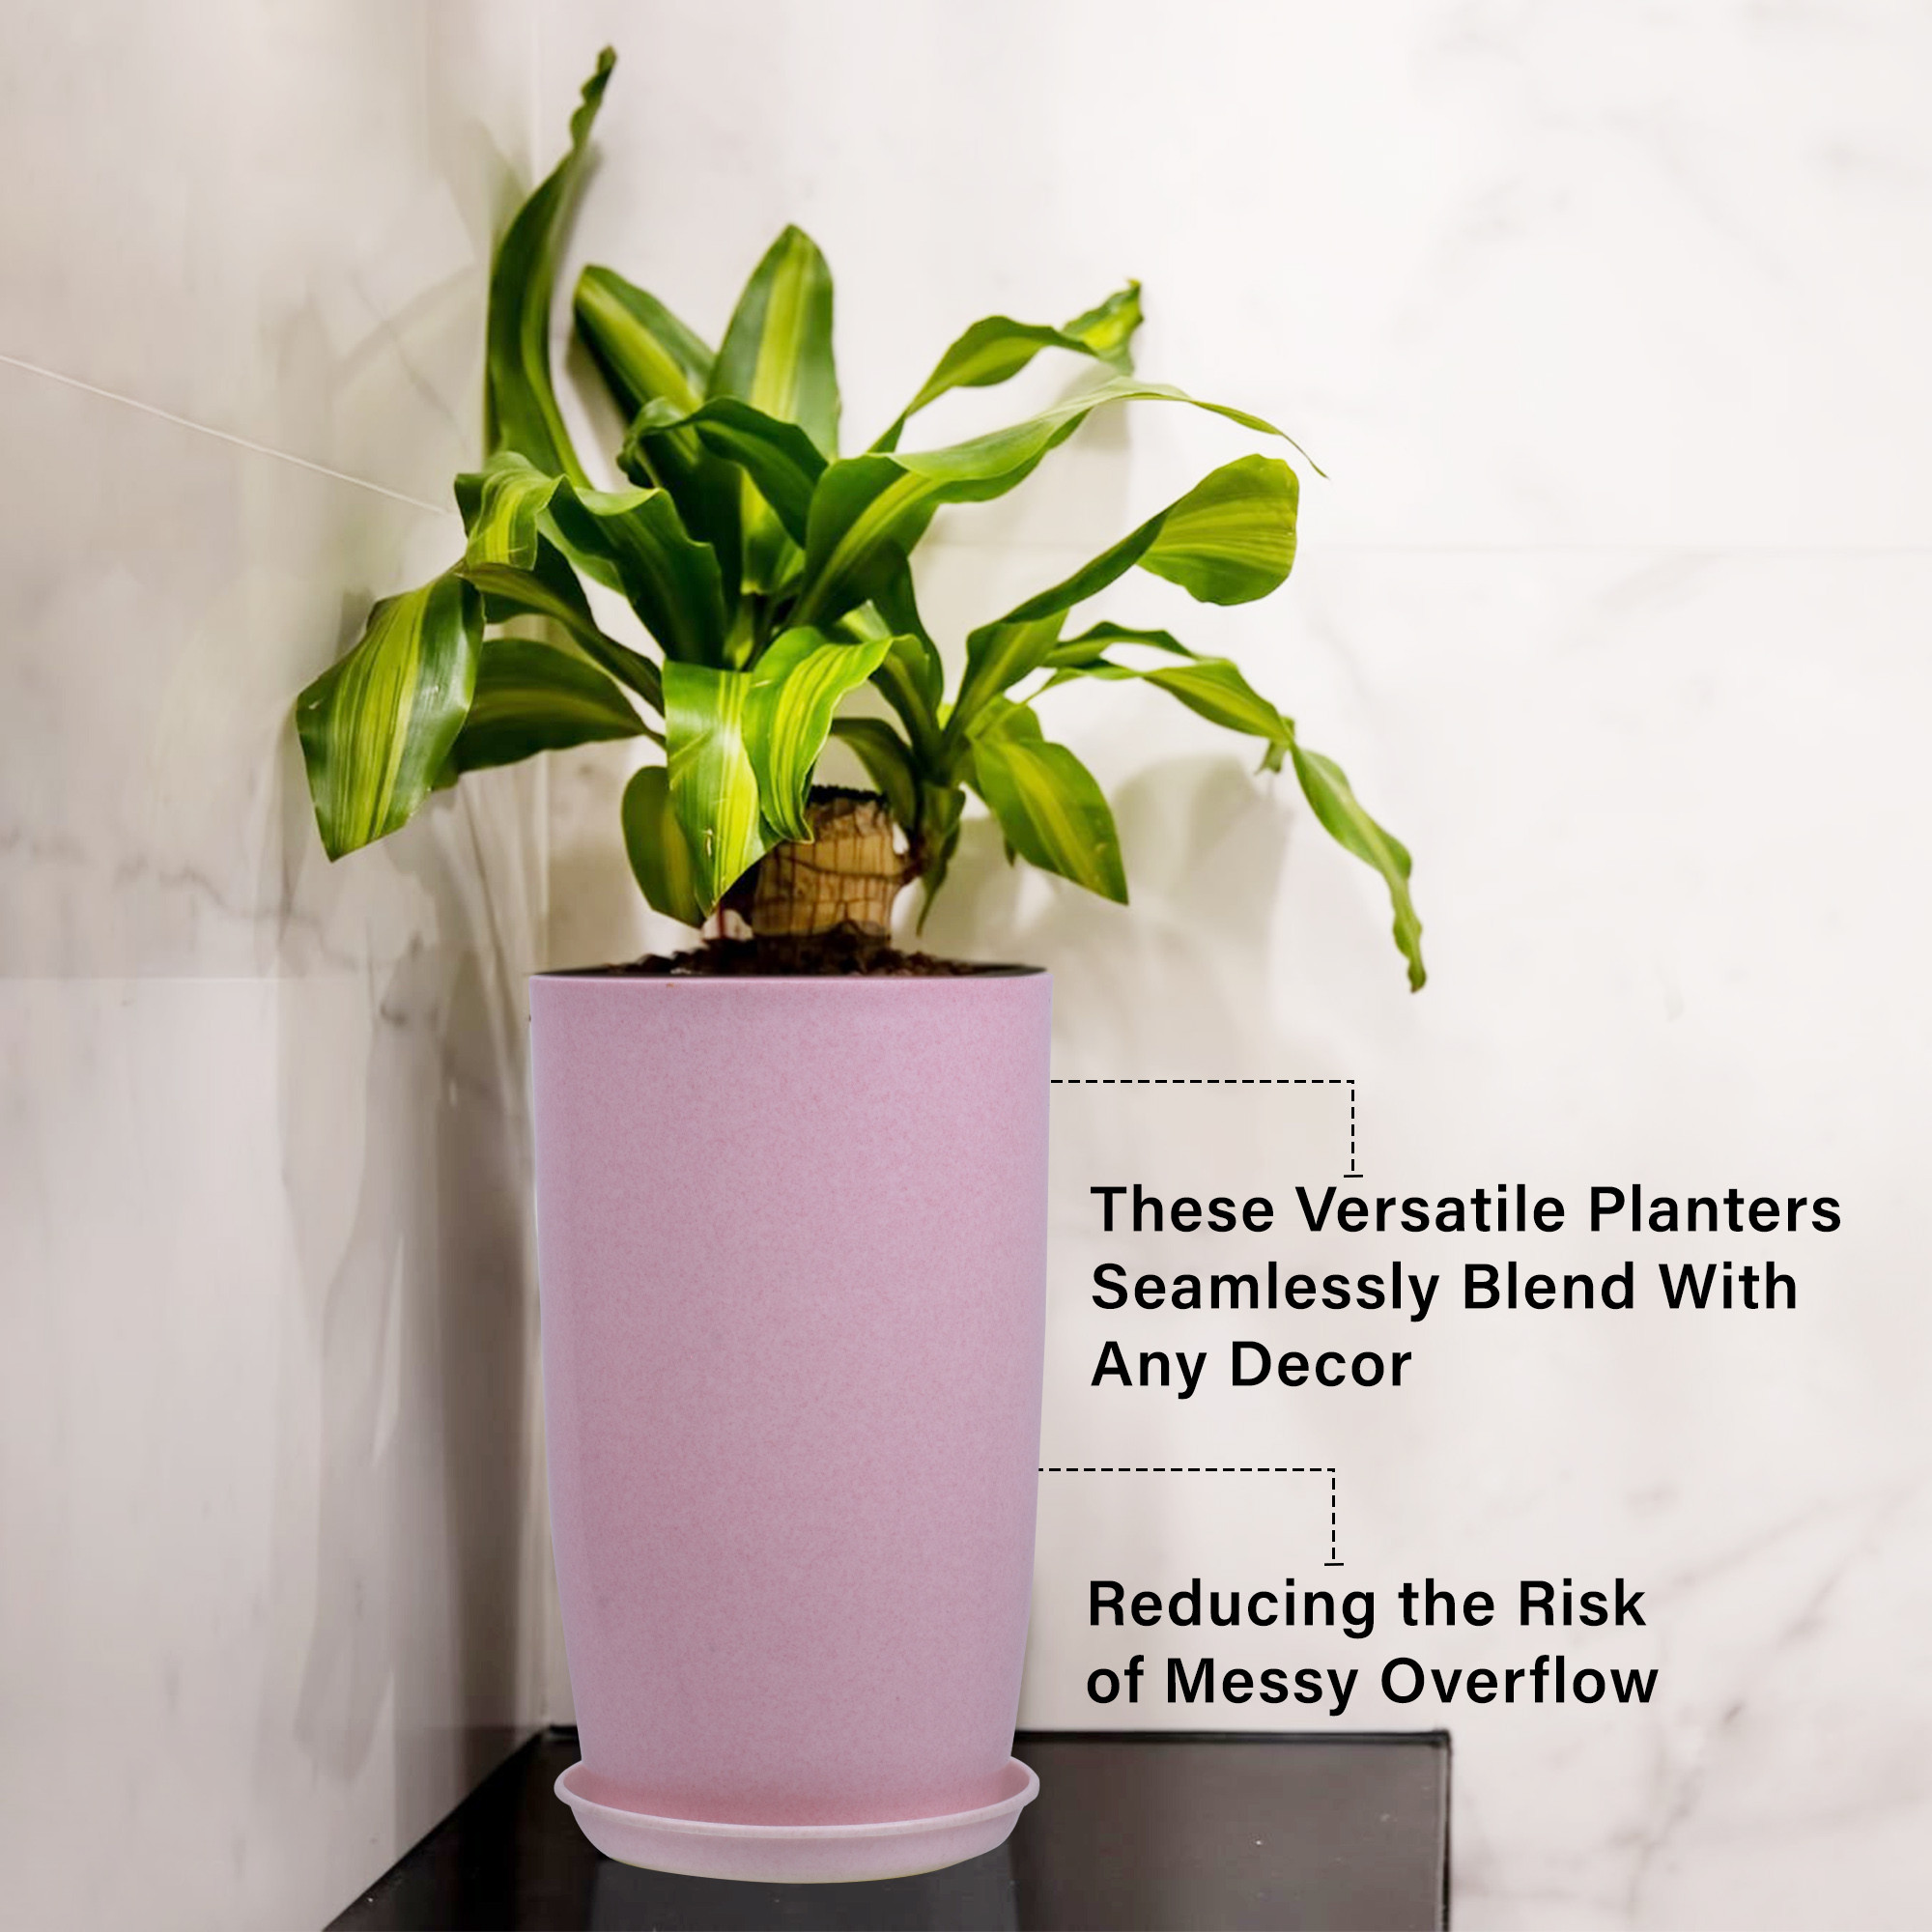 Kuber Industries Flower Pot with Plate | 18 Inch Lightweight Polymers Indoor-Outdoor Plant Pots | Flower Pot Gamla for Home-Office & Garden | Planter for Living Room | Marble Emerald | Pink